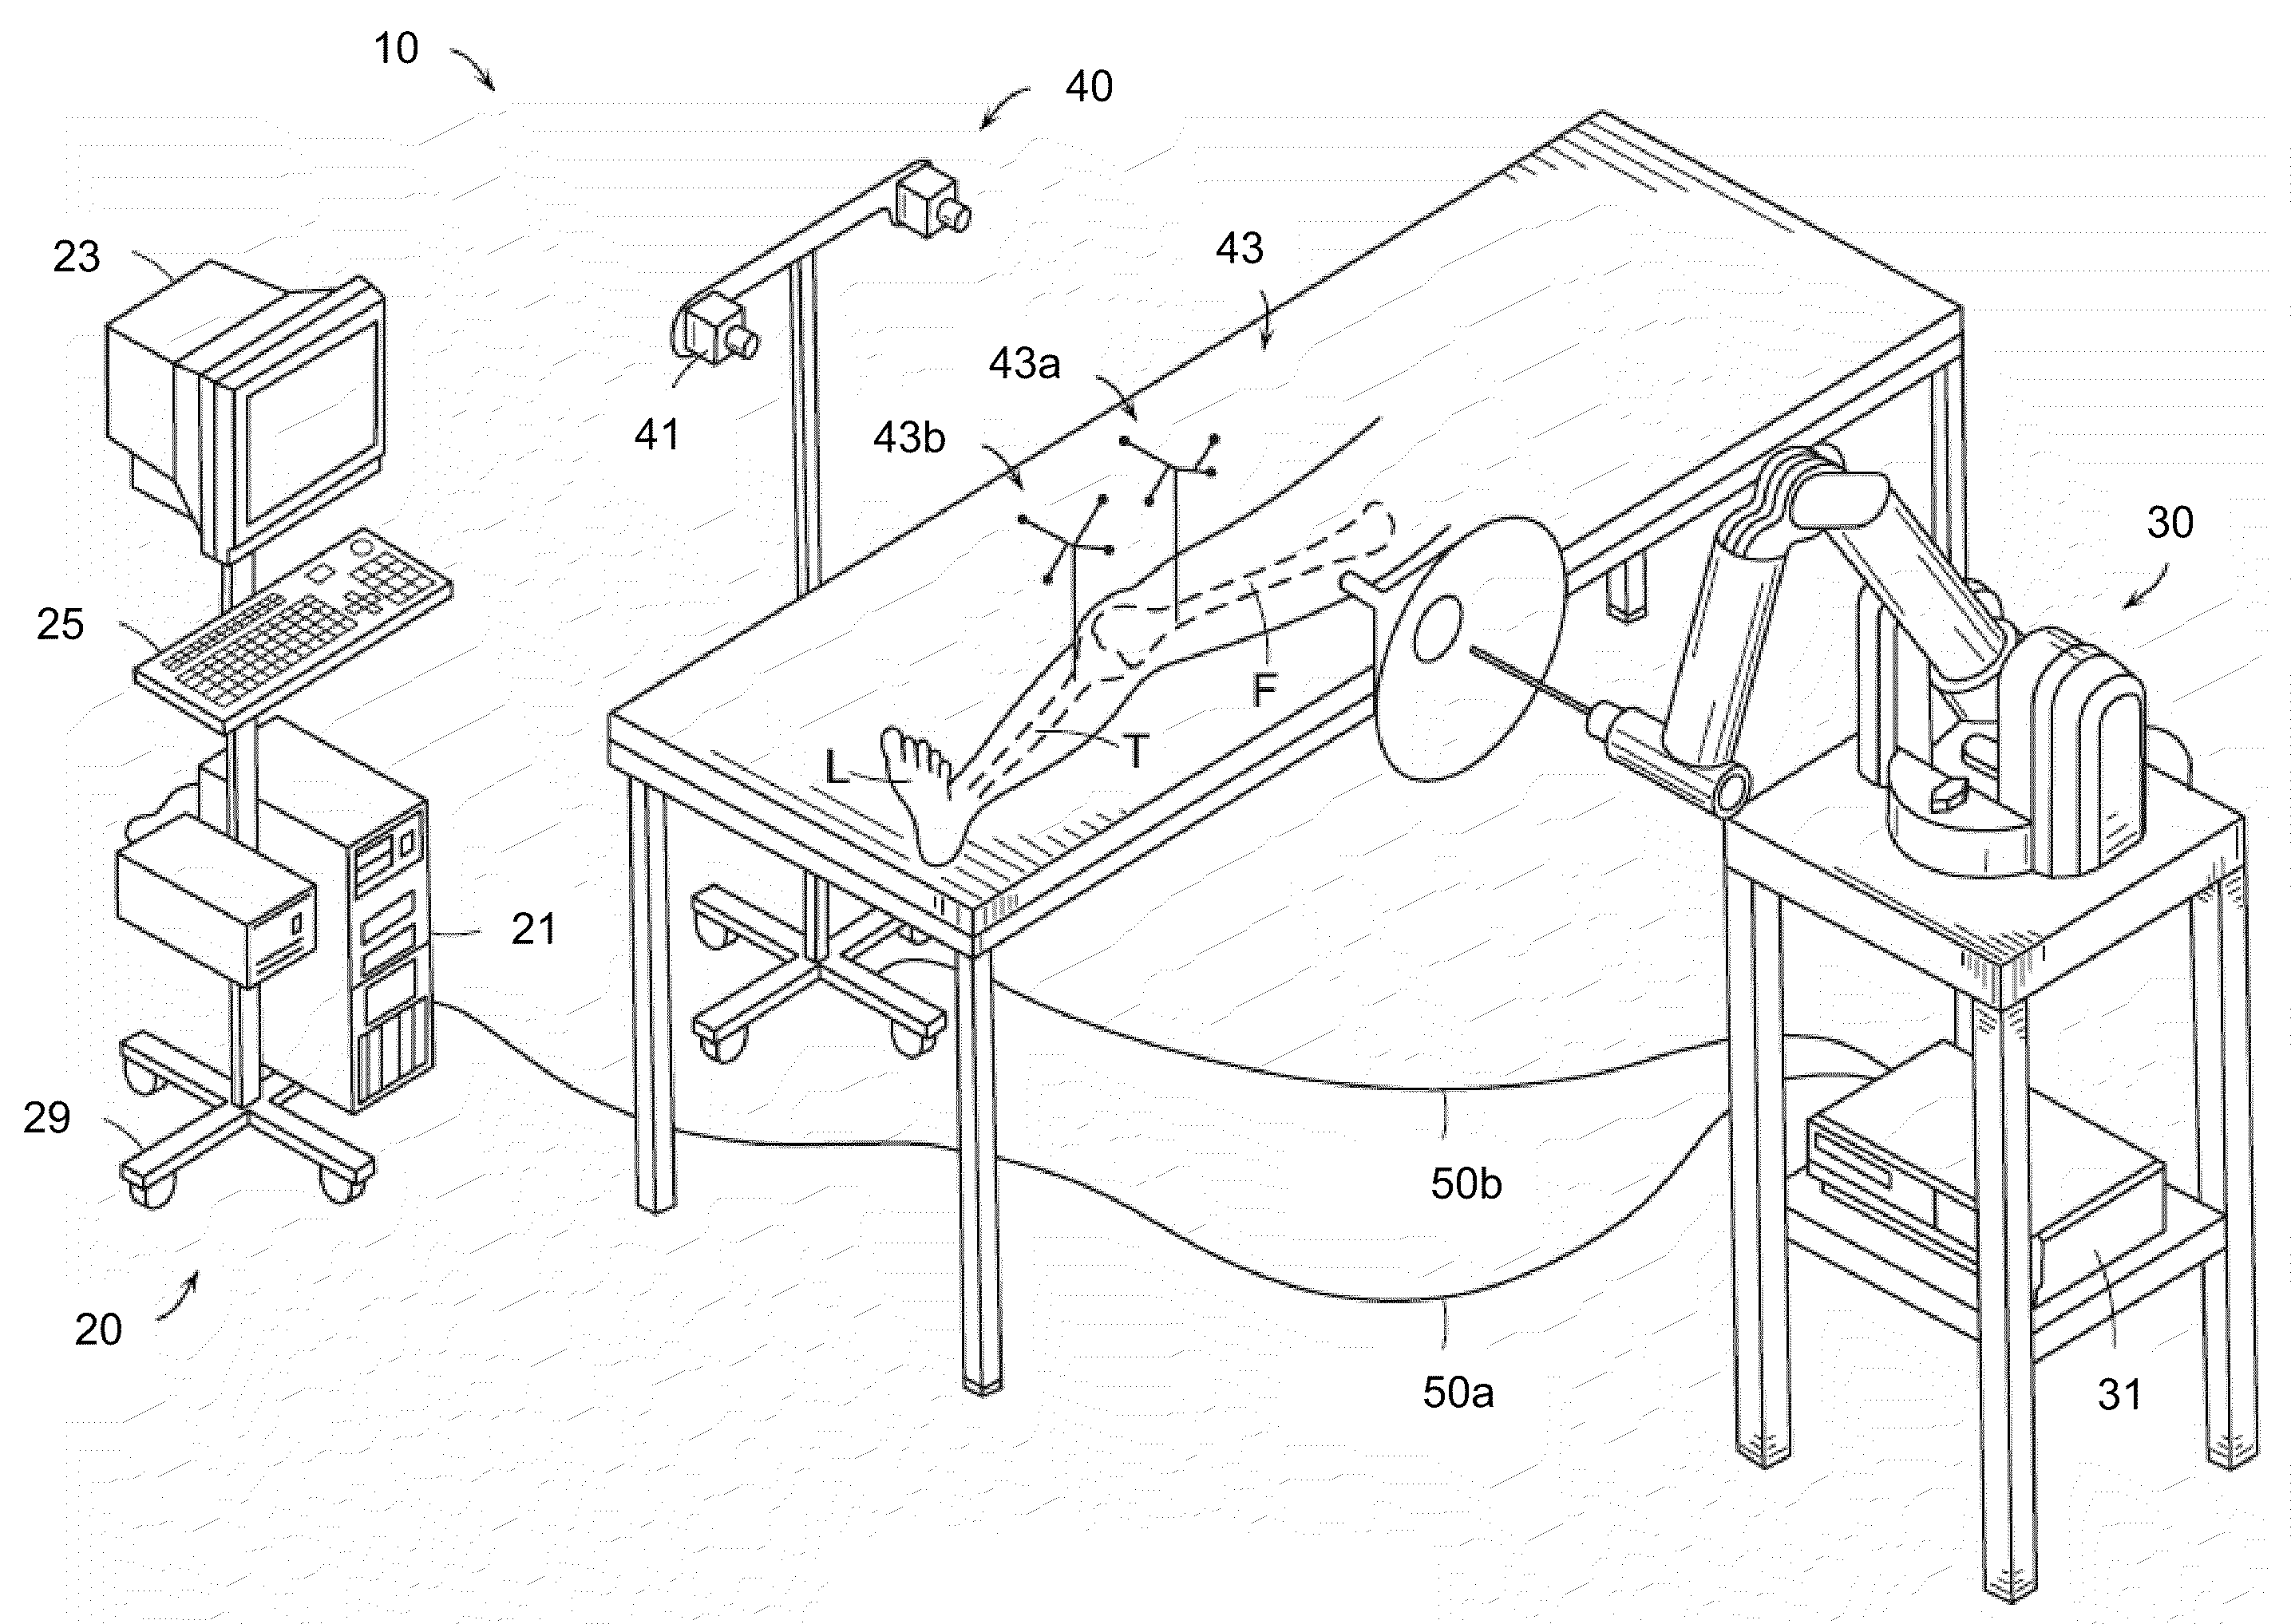 Self-detecting kinematic clamp assembly